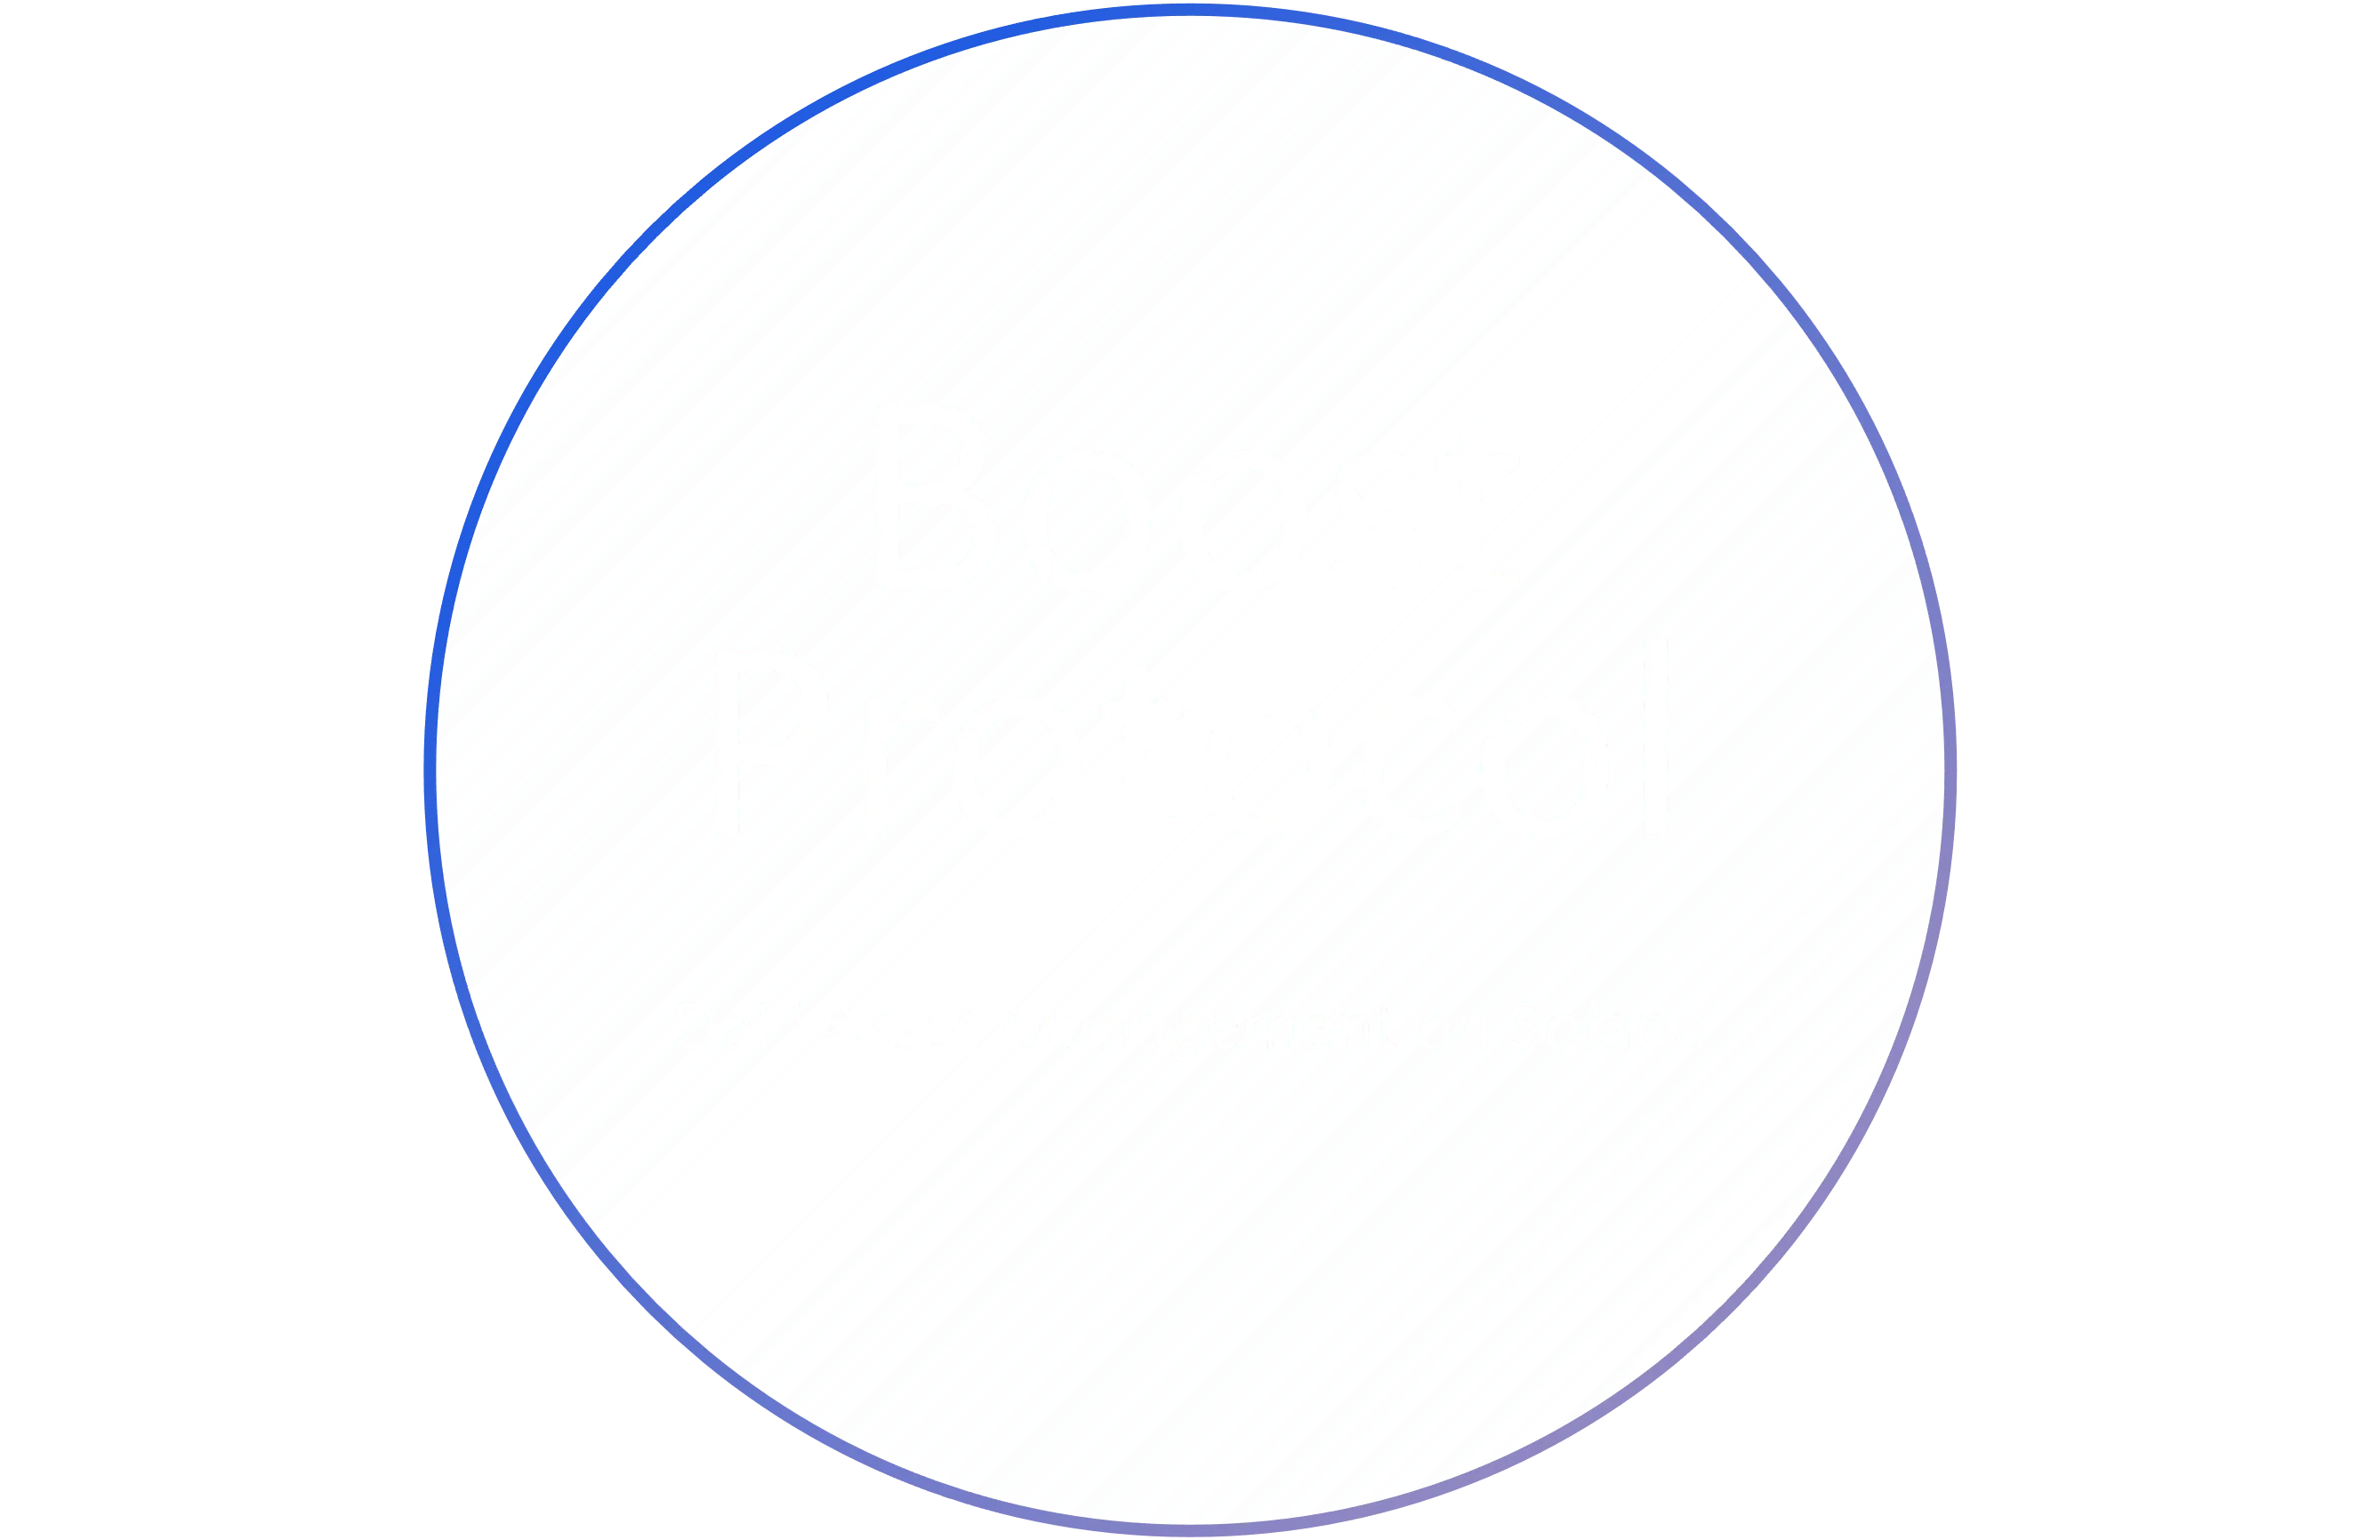 Boost Protocol, powered by Blade Labs